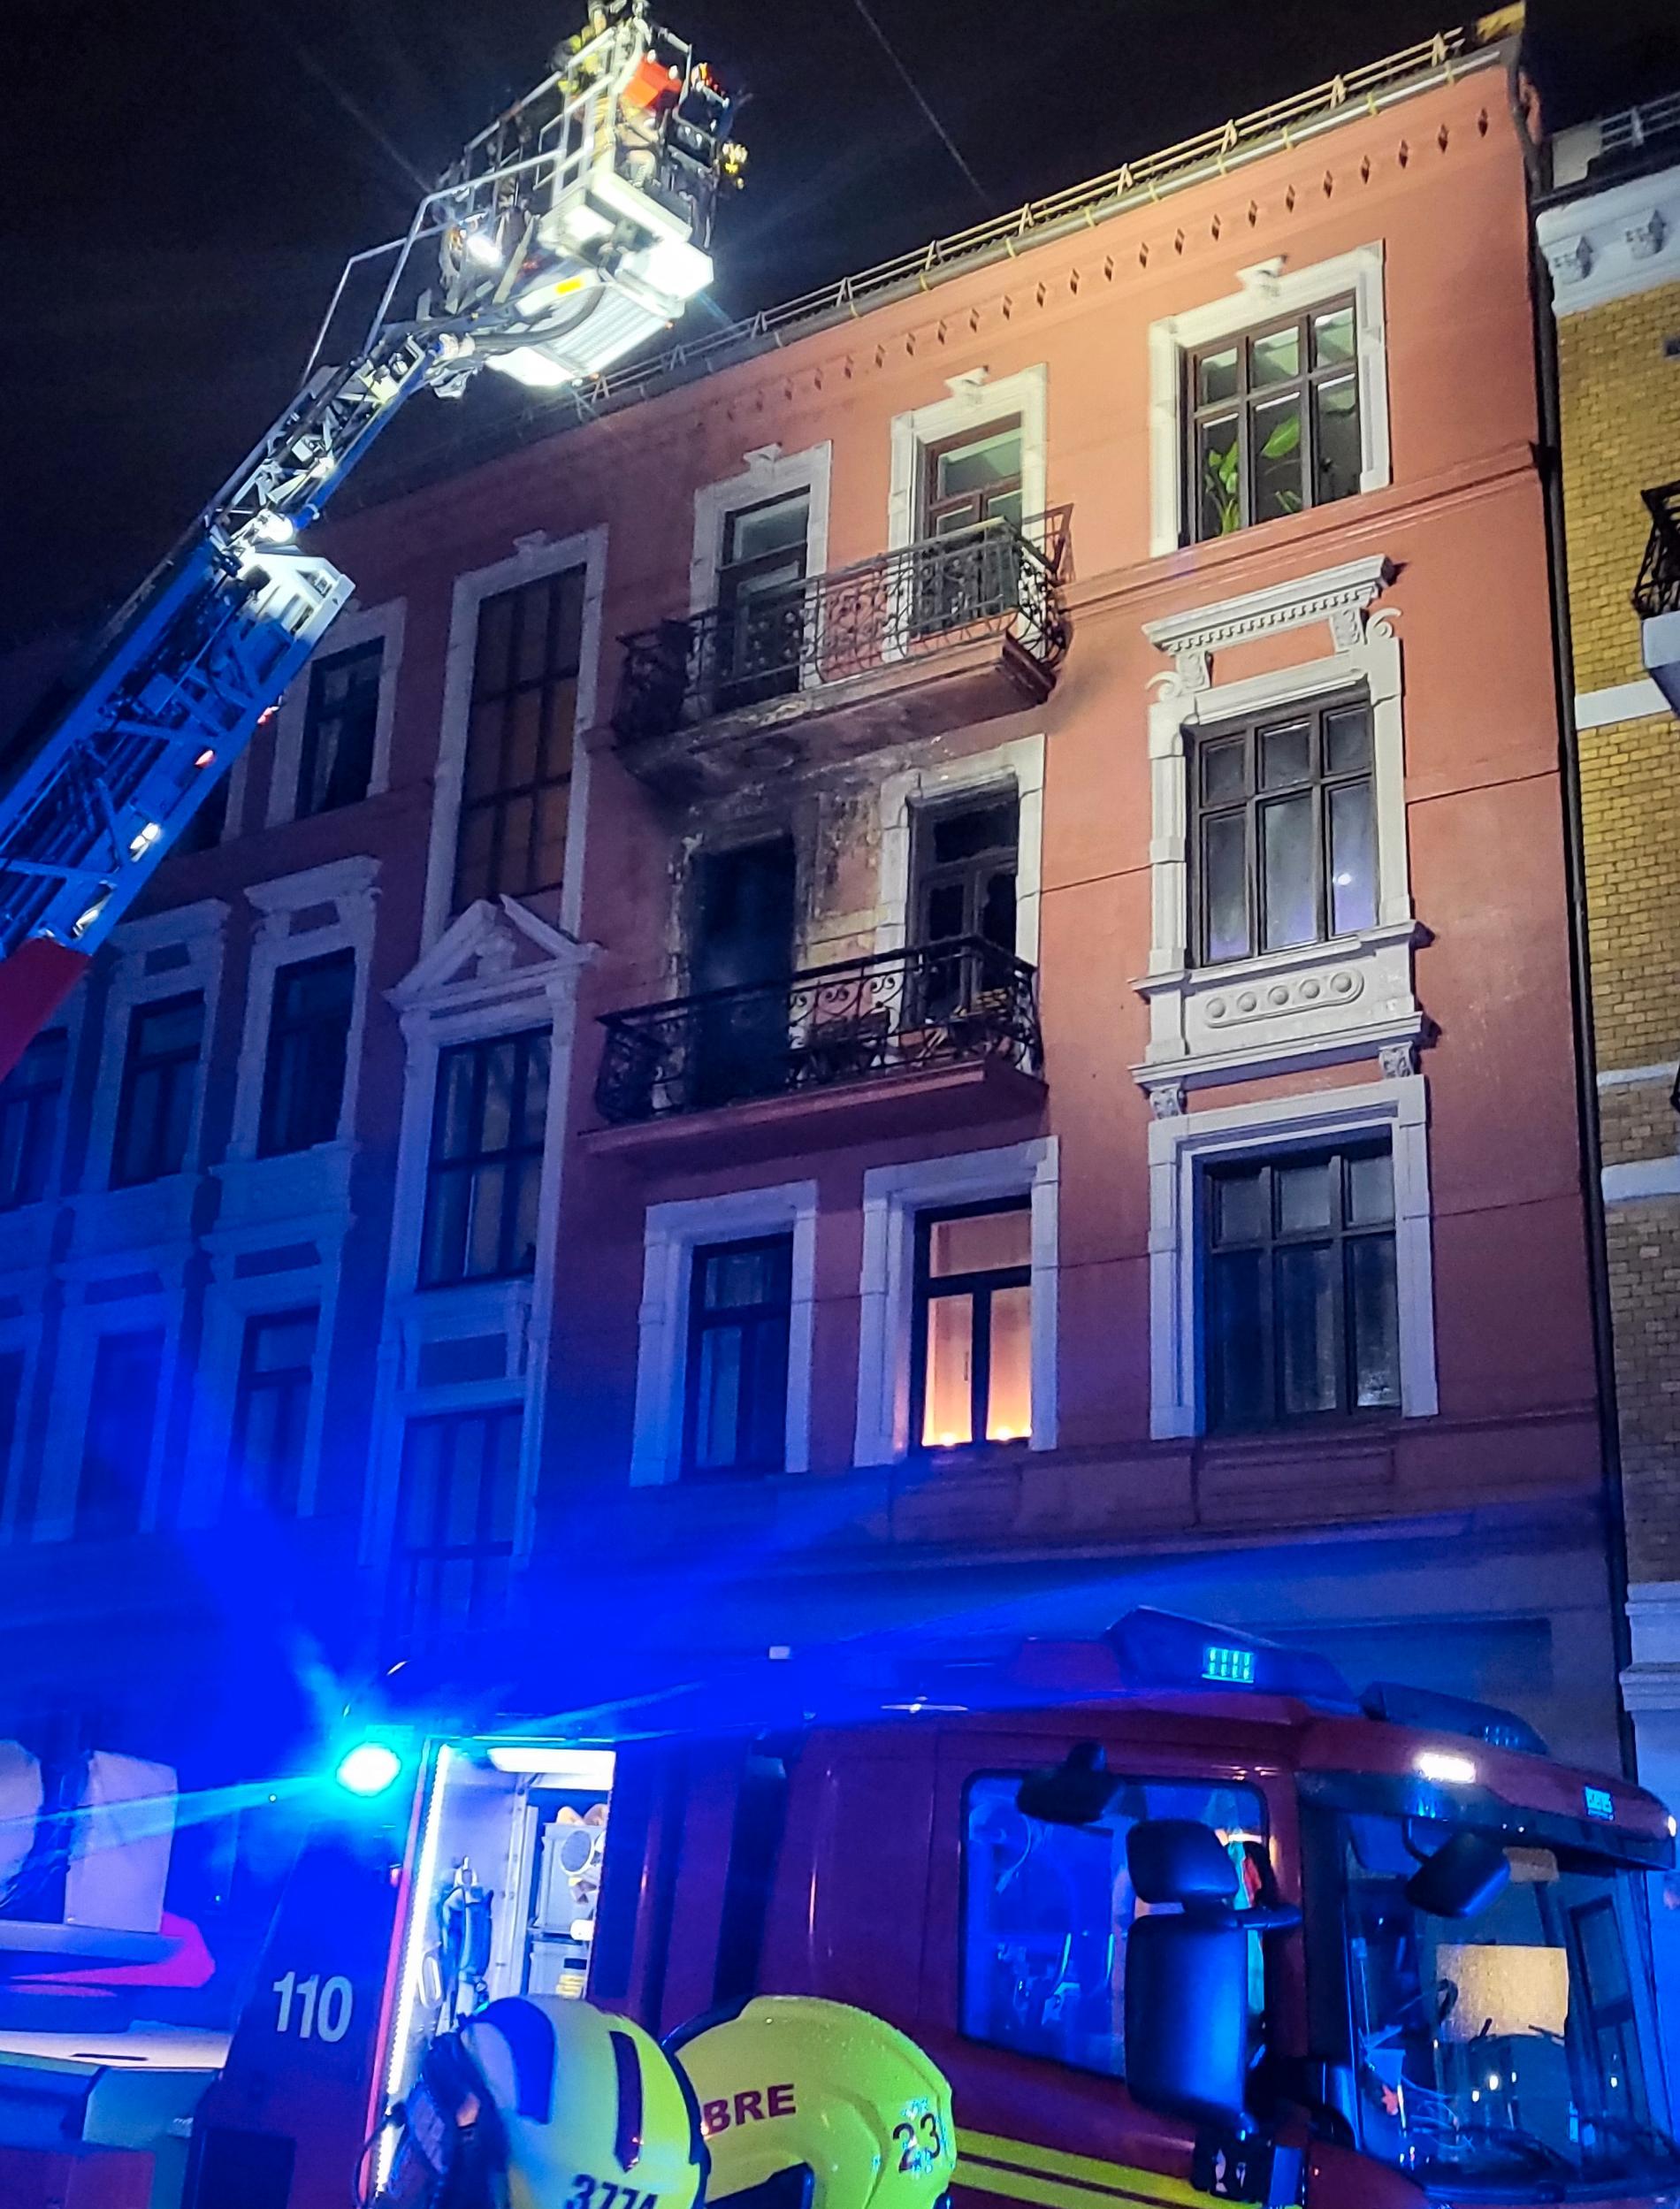 Fire at an apartment building in Oslo